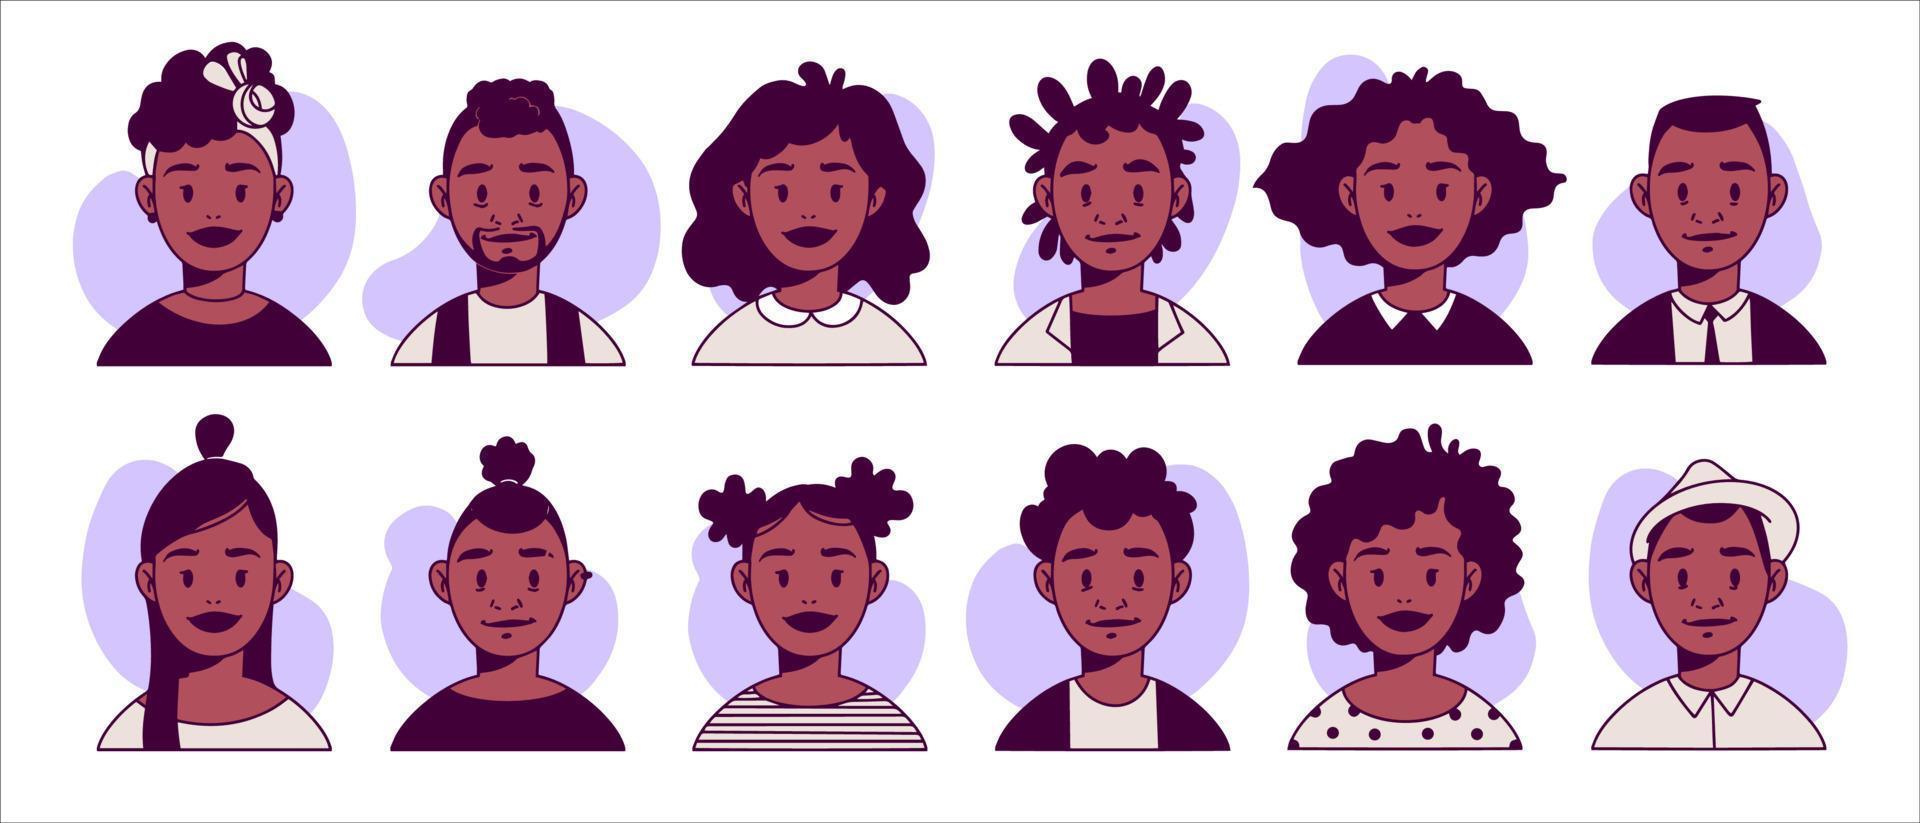 African American smiling faces, Colored hand drawn vector avatars of young men and women with different hairstyles and outfits. Avatar flat design icons. People icons. Isolated on white background